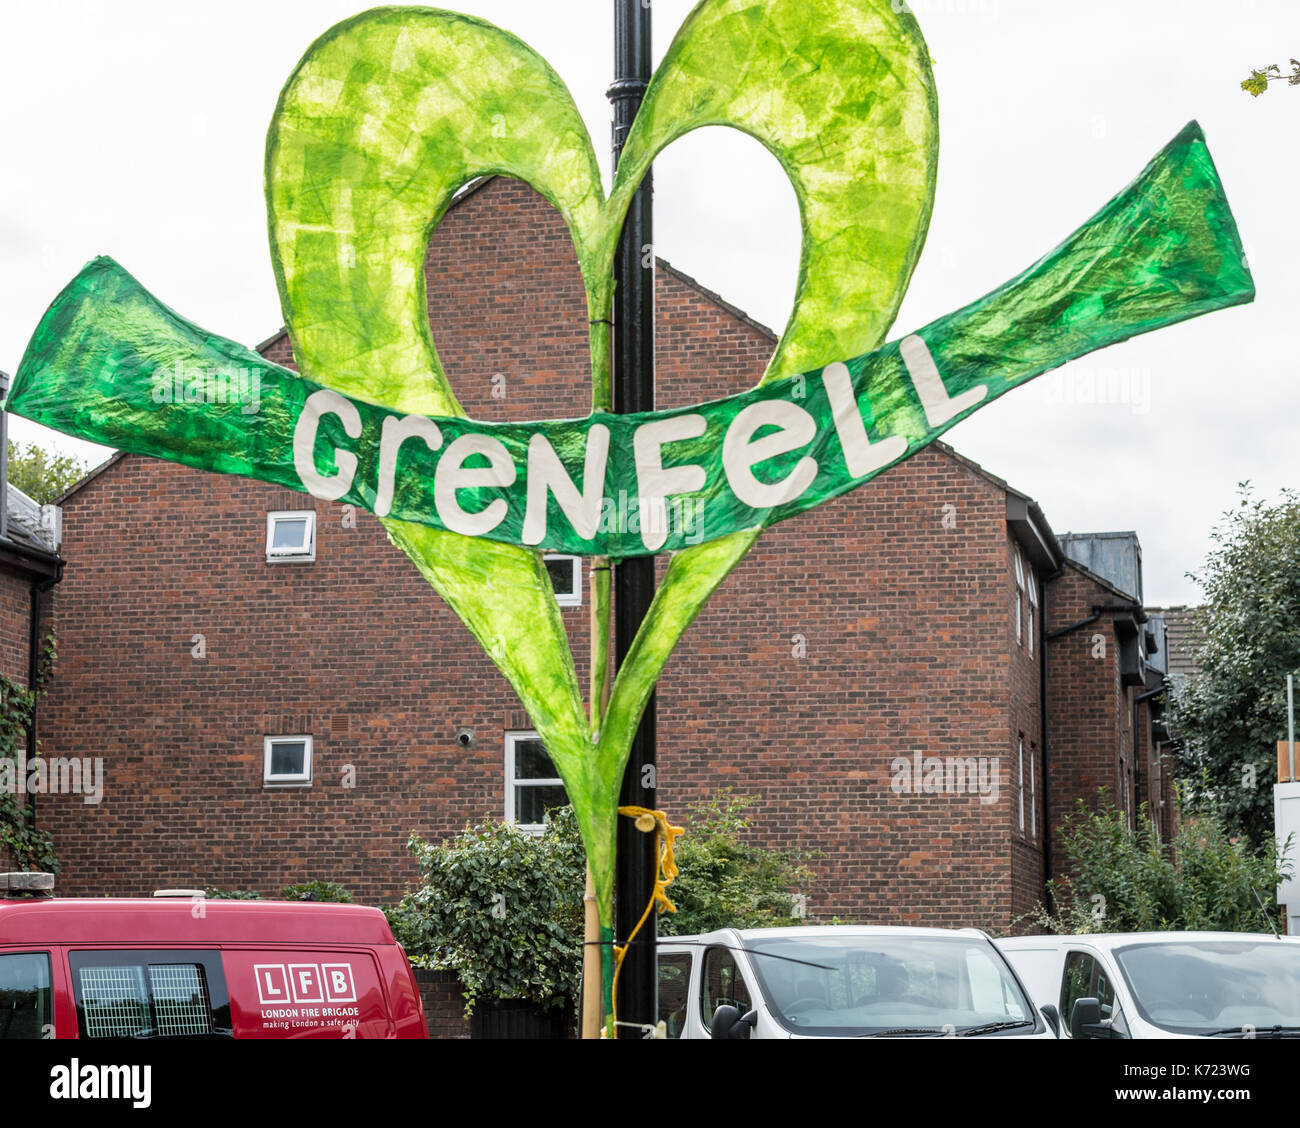 Kensington, London, UK. 14th Sep, 2017. Notting Hill Methodist Church was used for a live video feed from the Grenfell Tower inquiry and was attended by survivors and local residents who expressed a lack of confidence in the process. Several complained they had yet to be rehoused or compensated for their loss. Credit: Ian Davidson/Alamy Live News Stock Photo